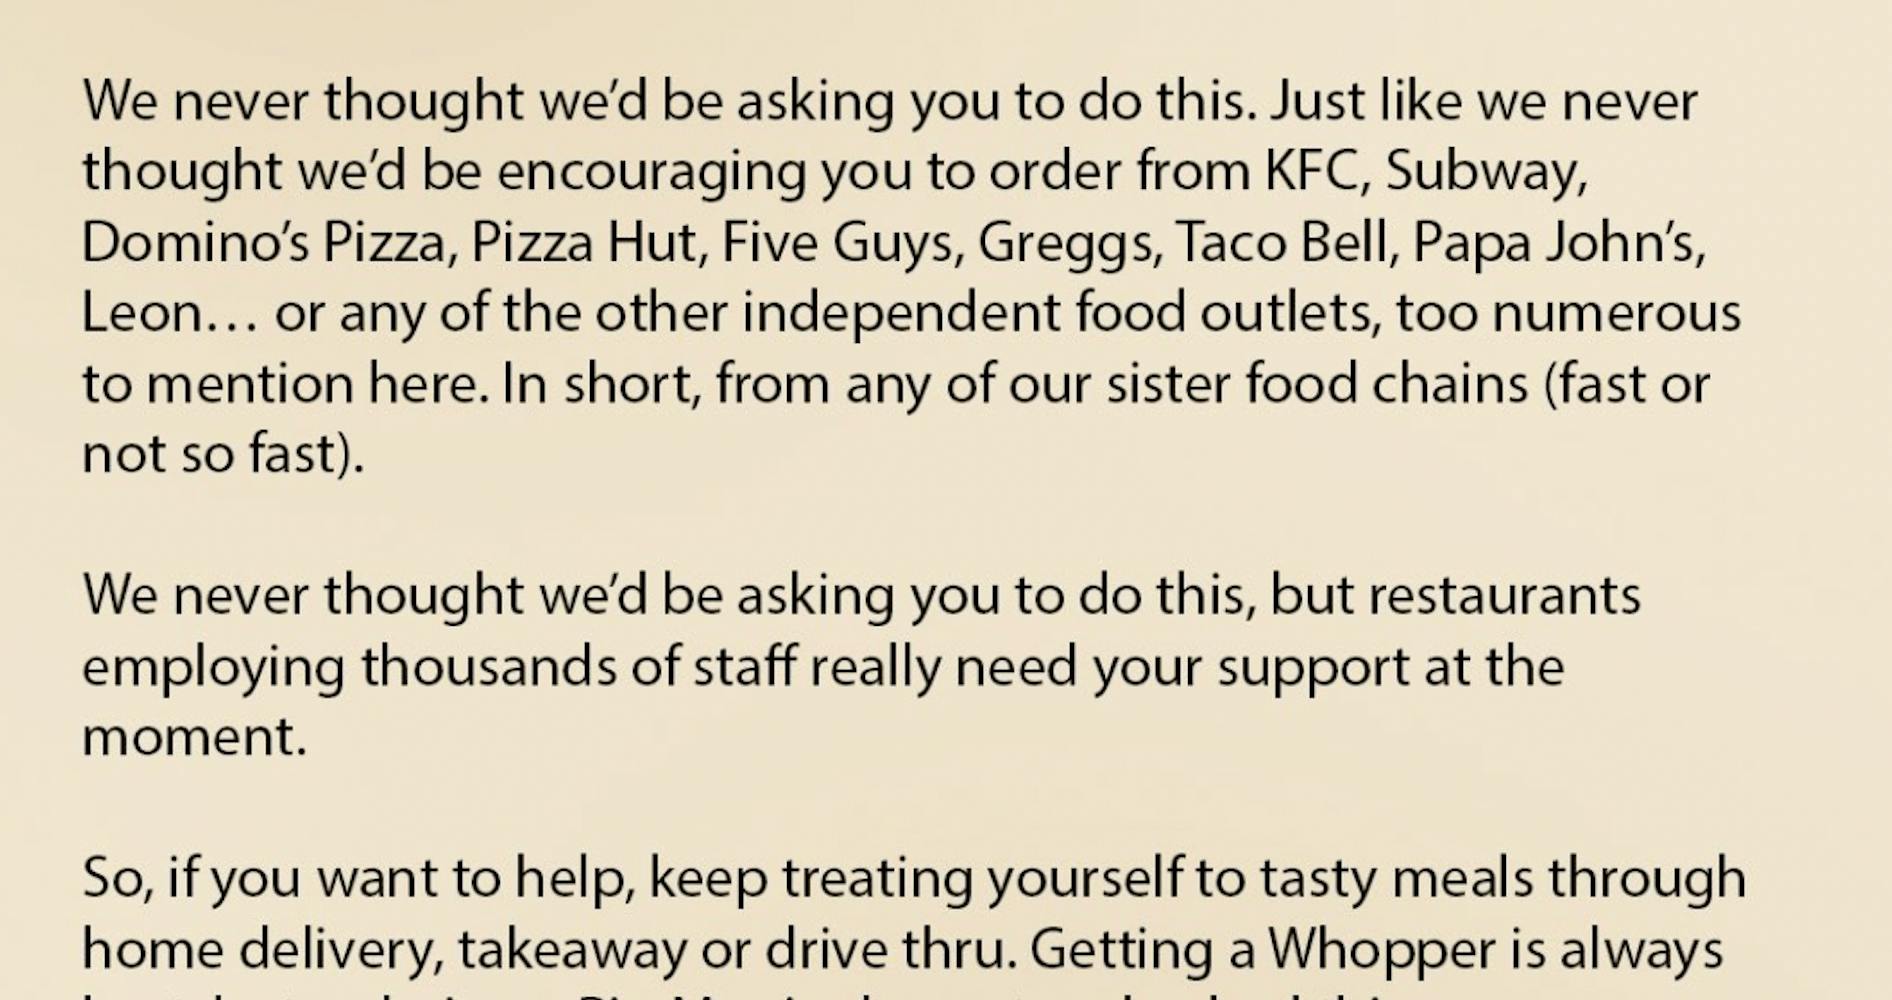 Text ad: Order from McDonald's, we never thought we'd be asking you to do this, but restaurants employing thousands of staff really need your support at the moment... Take care, Team Burger King UK.